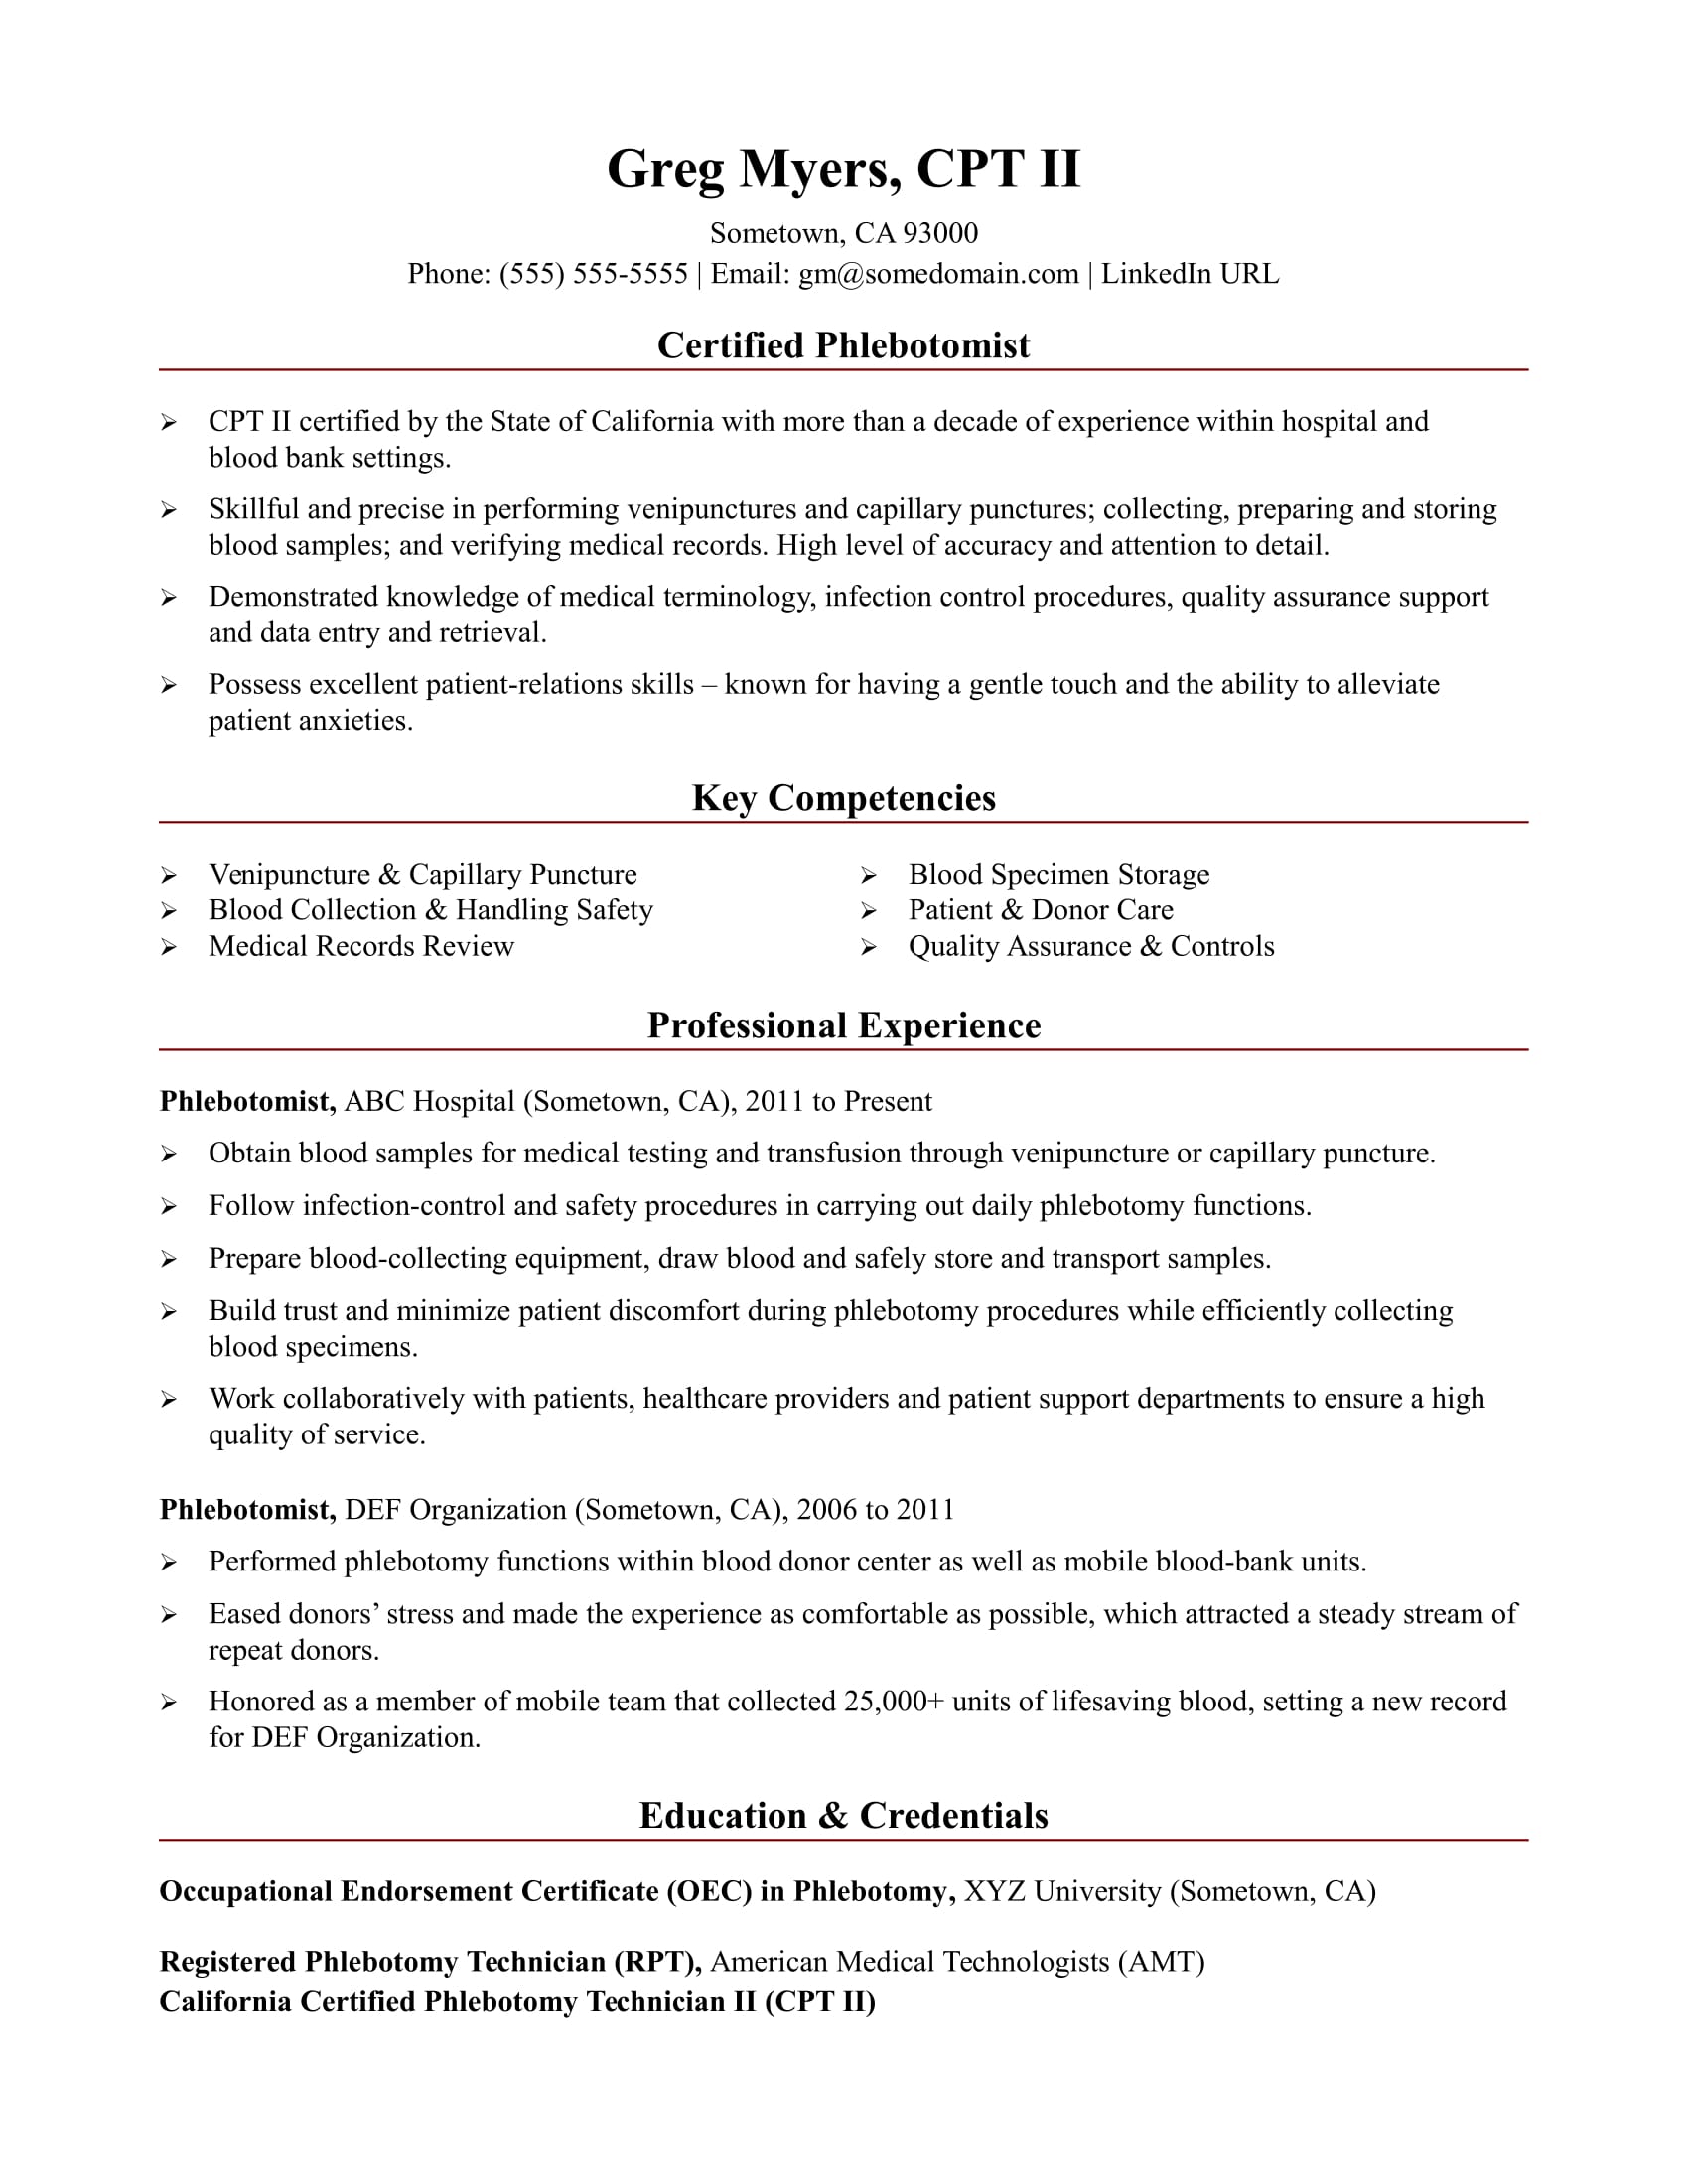 Example Of Resume With Certification